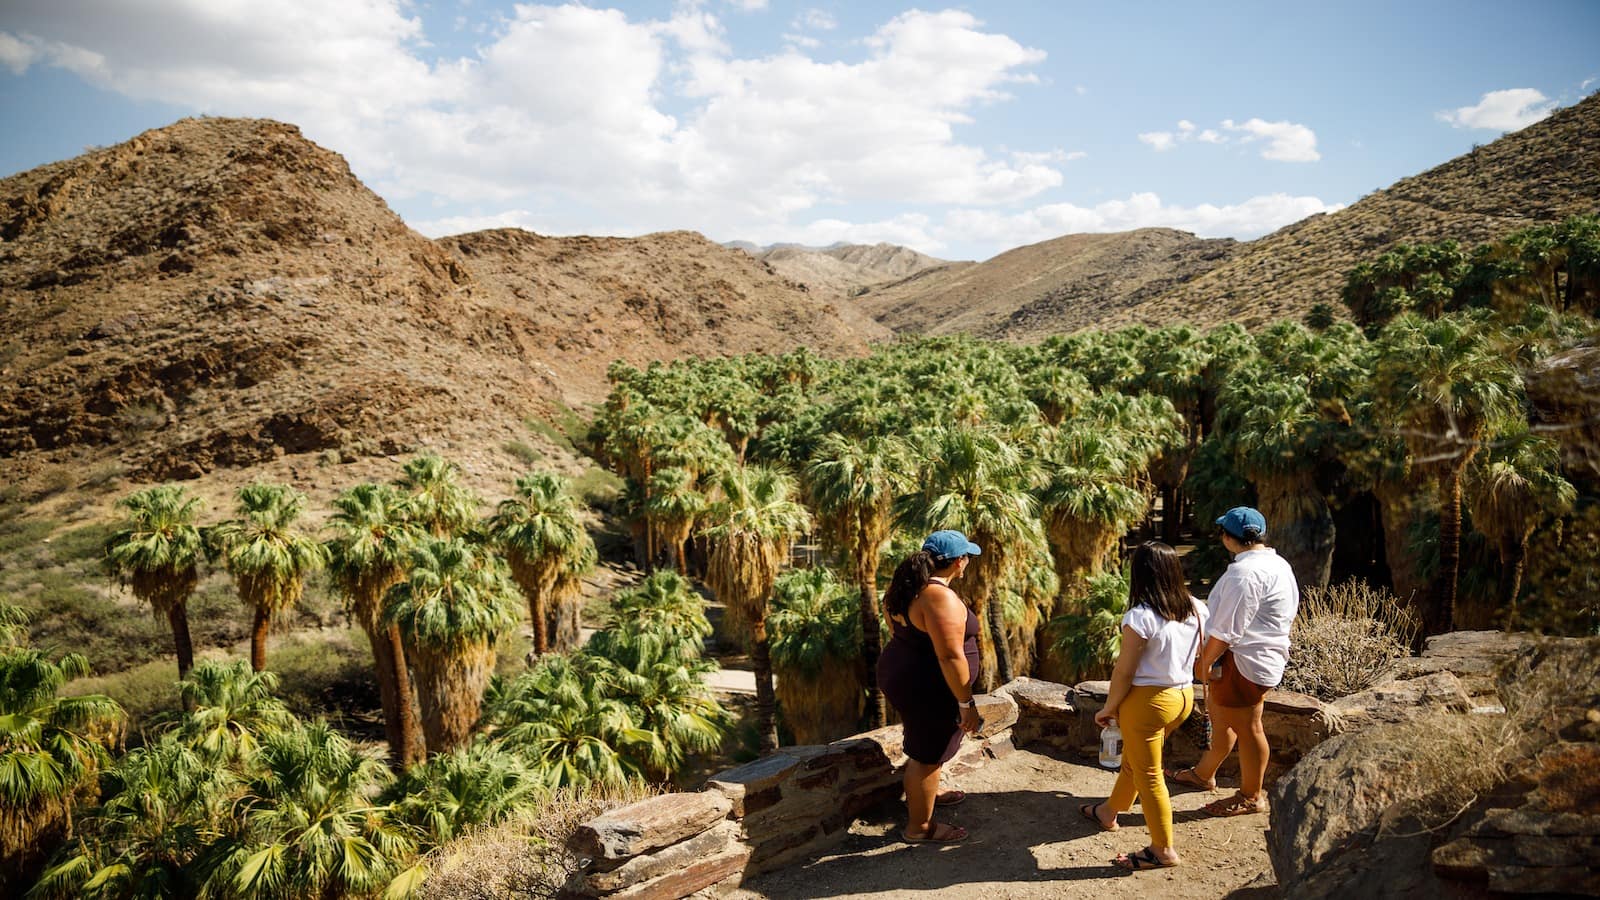 do_cali_Andreas Canyon at Agua Caliente near Palm Springs_800x450_ (photo, Max Whittaker)